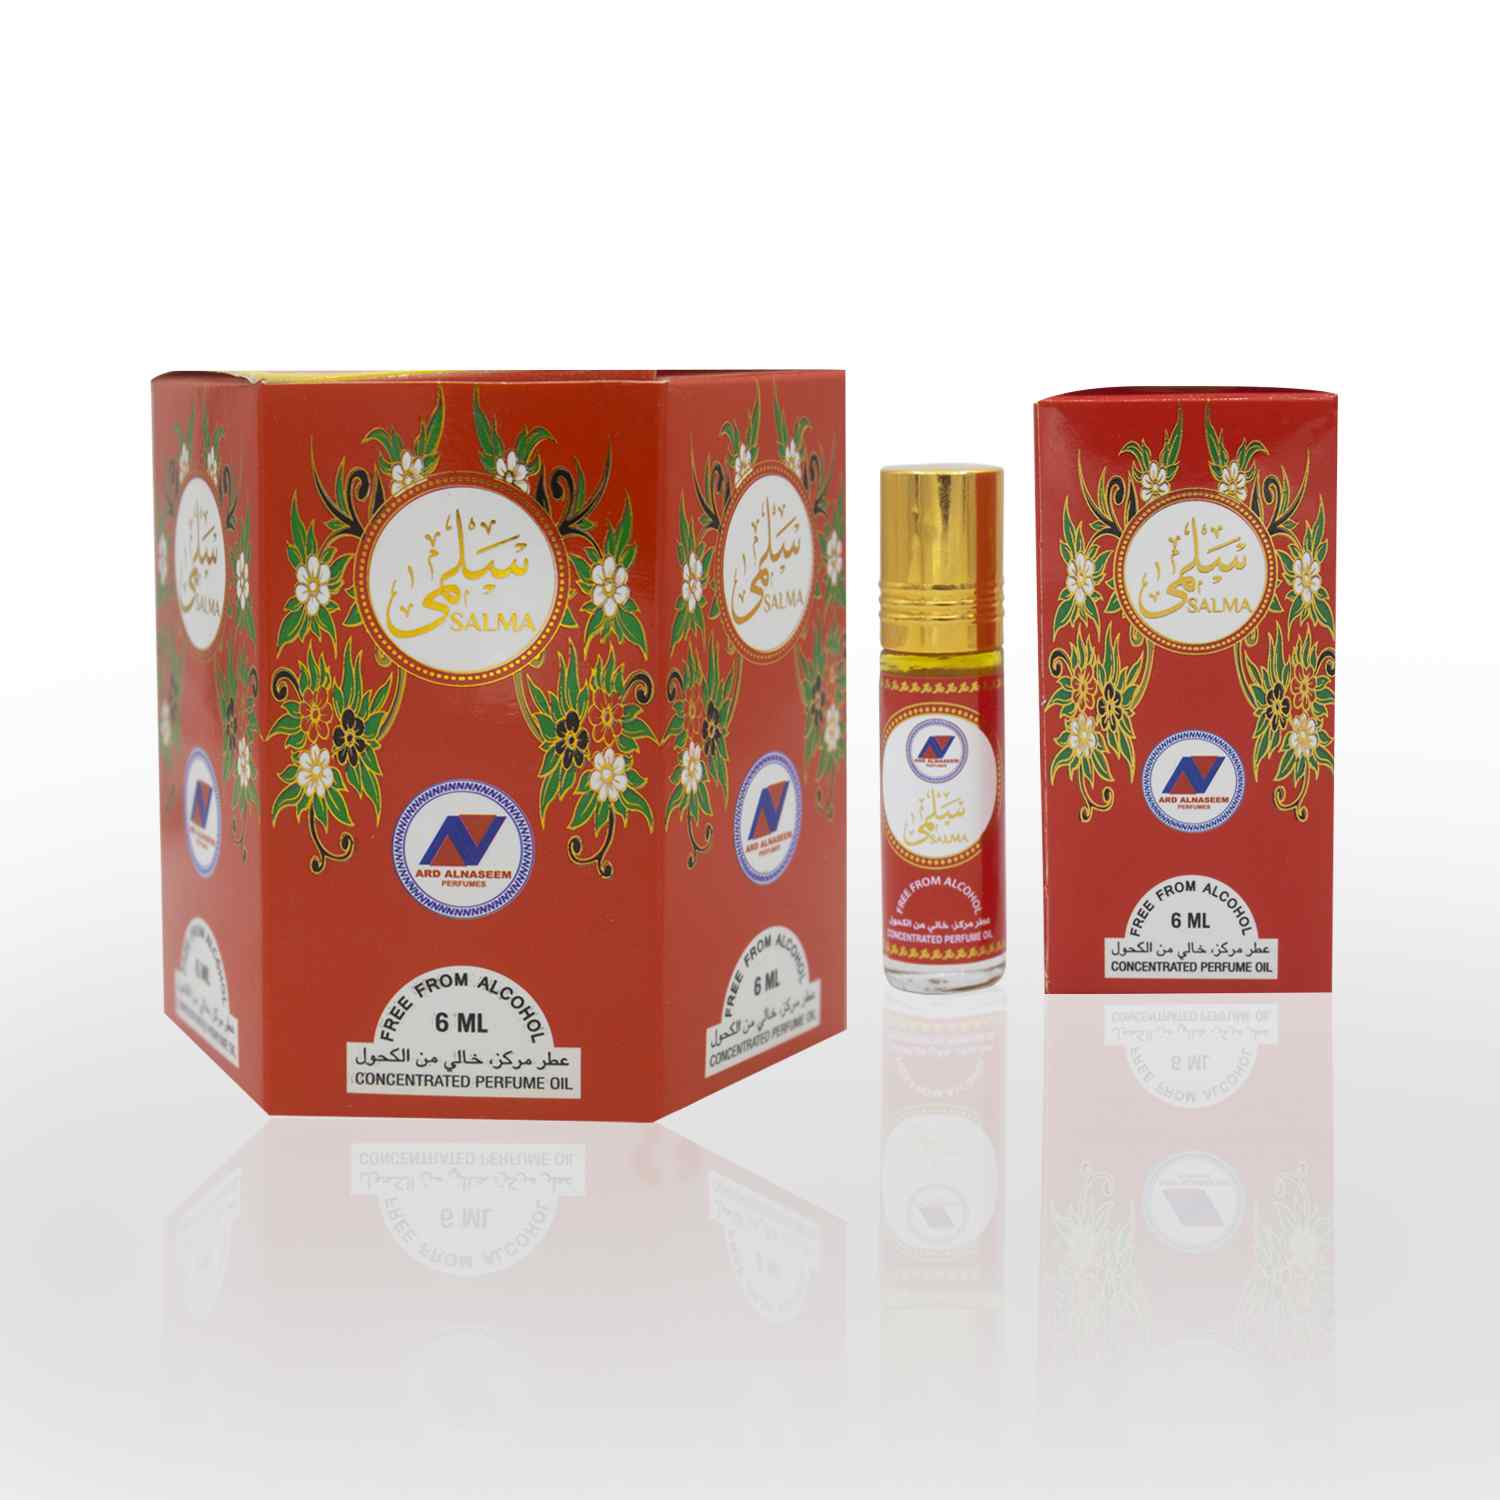 Salma 6ml Attar is a concentered perfume oil, free from Alcohol. It is a product of ARD perfumes. Made in UAE